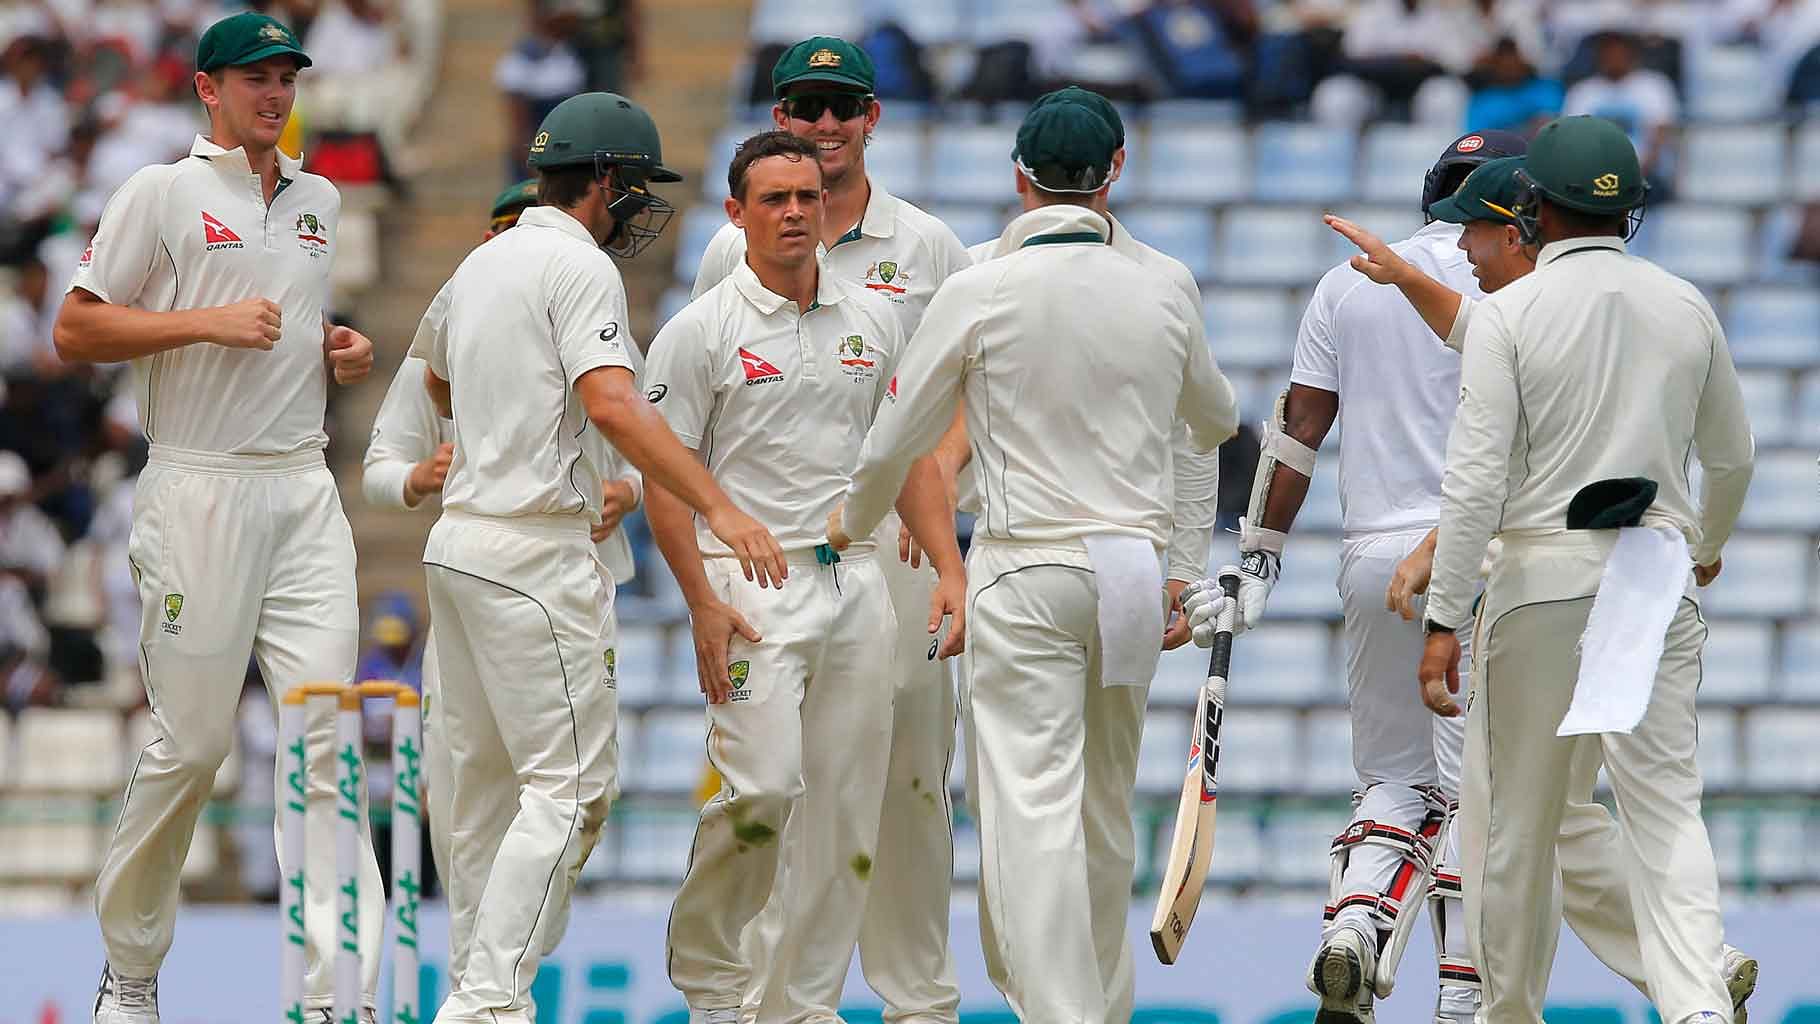 Australian spinner Steve O’Keefe celebrates after grabbing a wicket in the 1st Test Match against Sri Lanka. (Photo: AP)